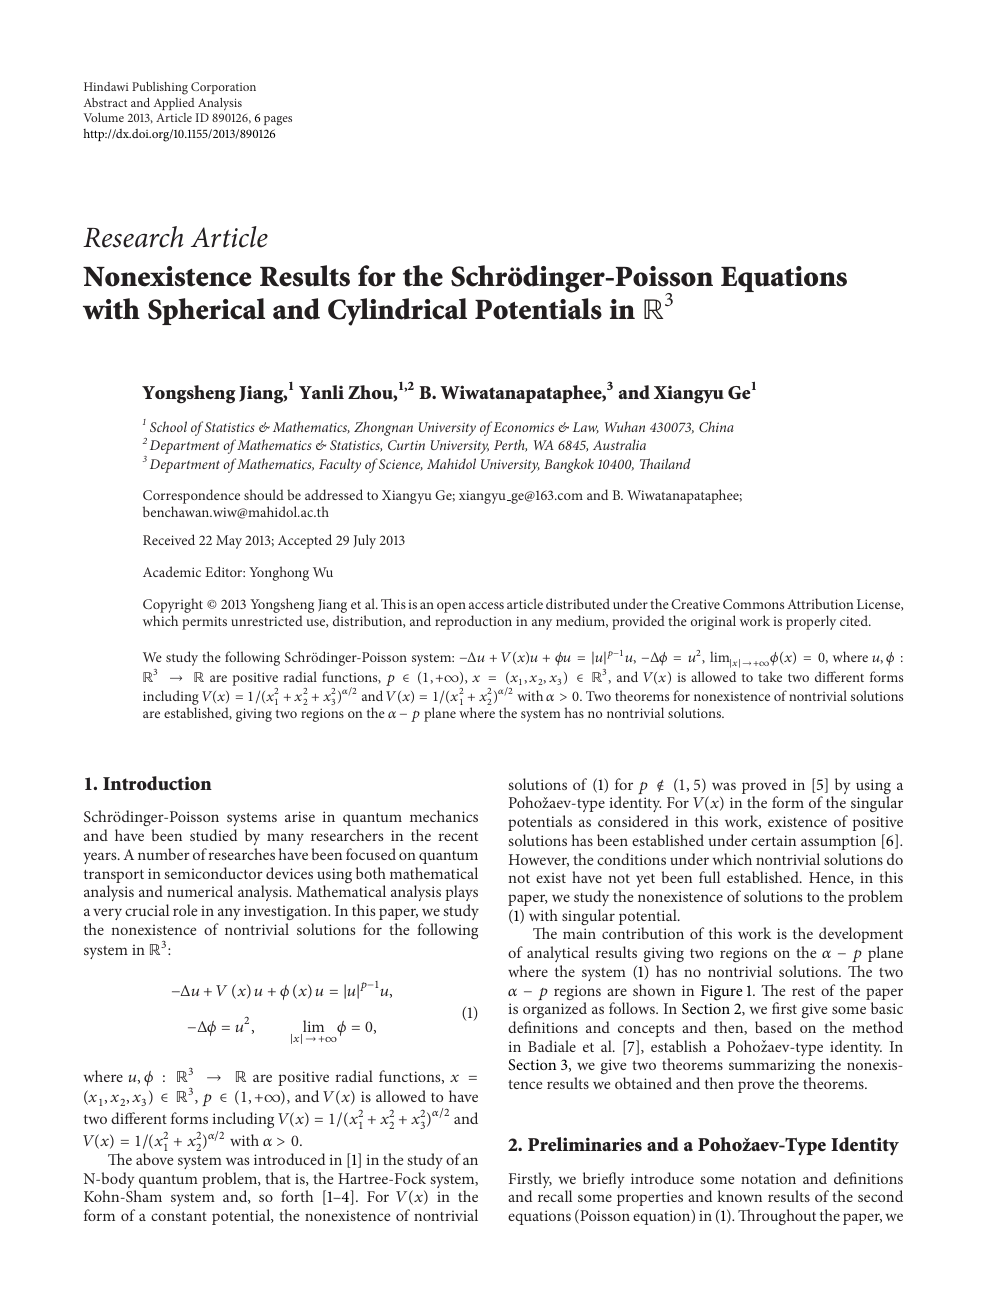 Nonexistence Results For The Schrodinger Poisson Equations With Spherical And Cylindrical Potentials In Topic Of Research Paper In Mathematics Download Scholarly Article Pdf And Read For Free On Cyberleninka Open Science Hub